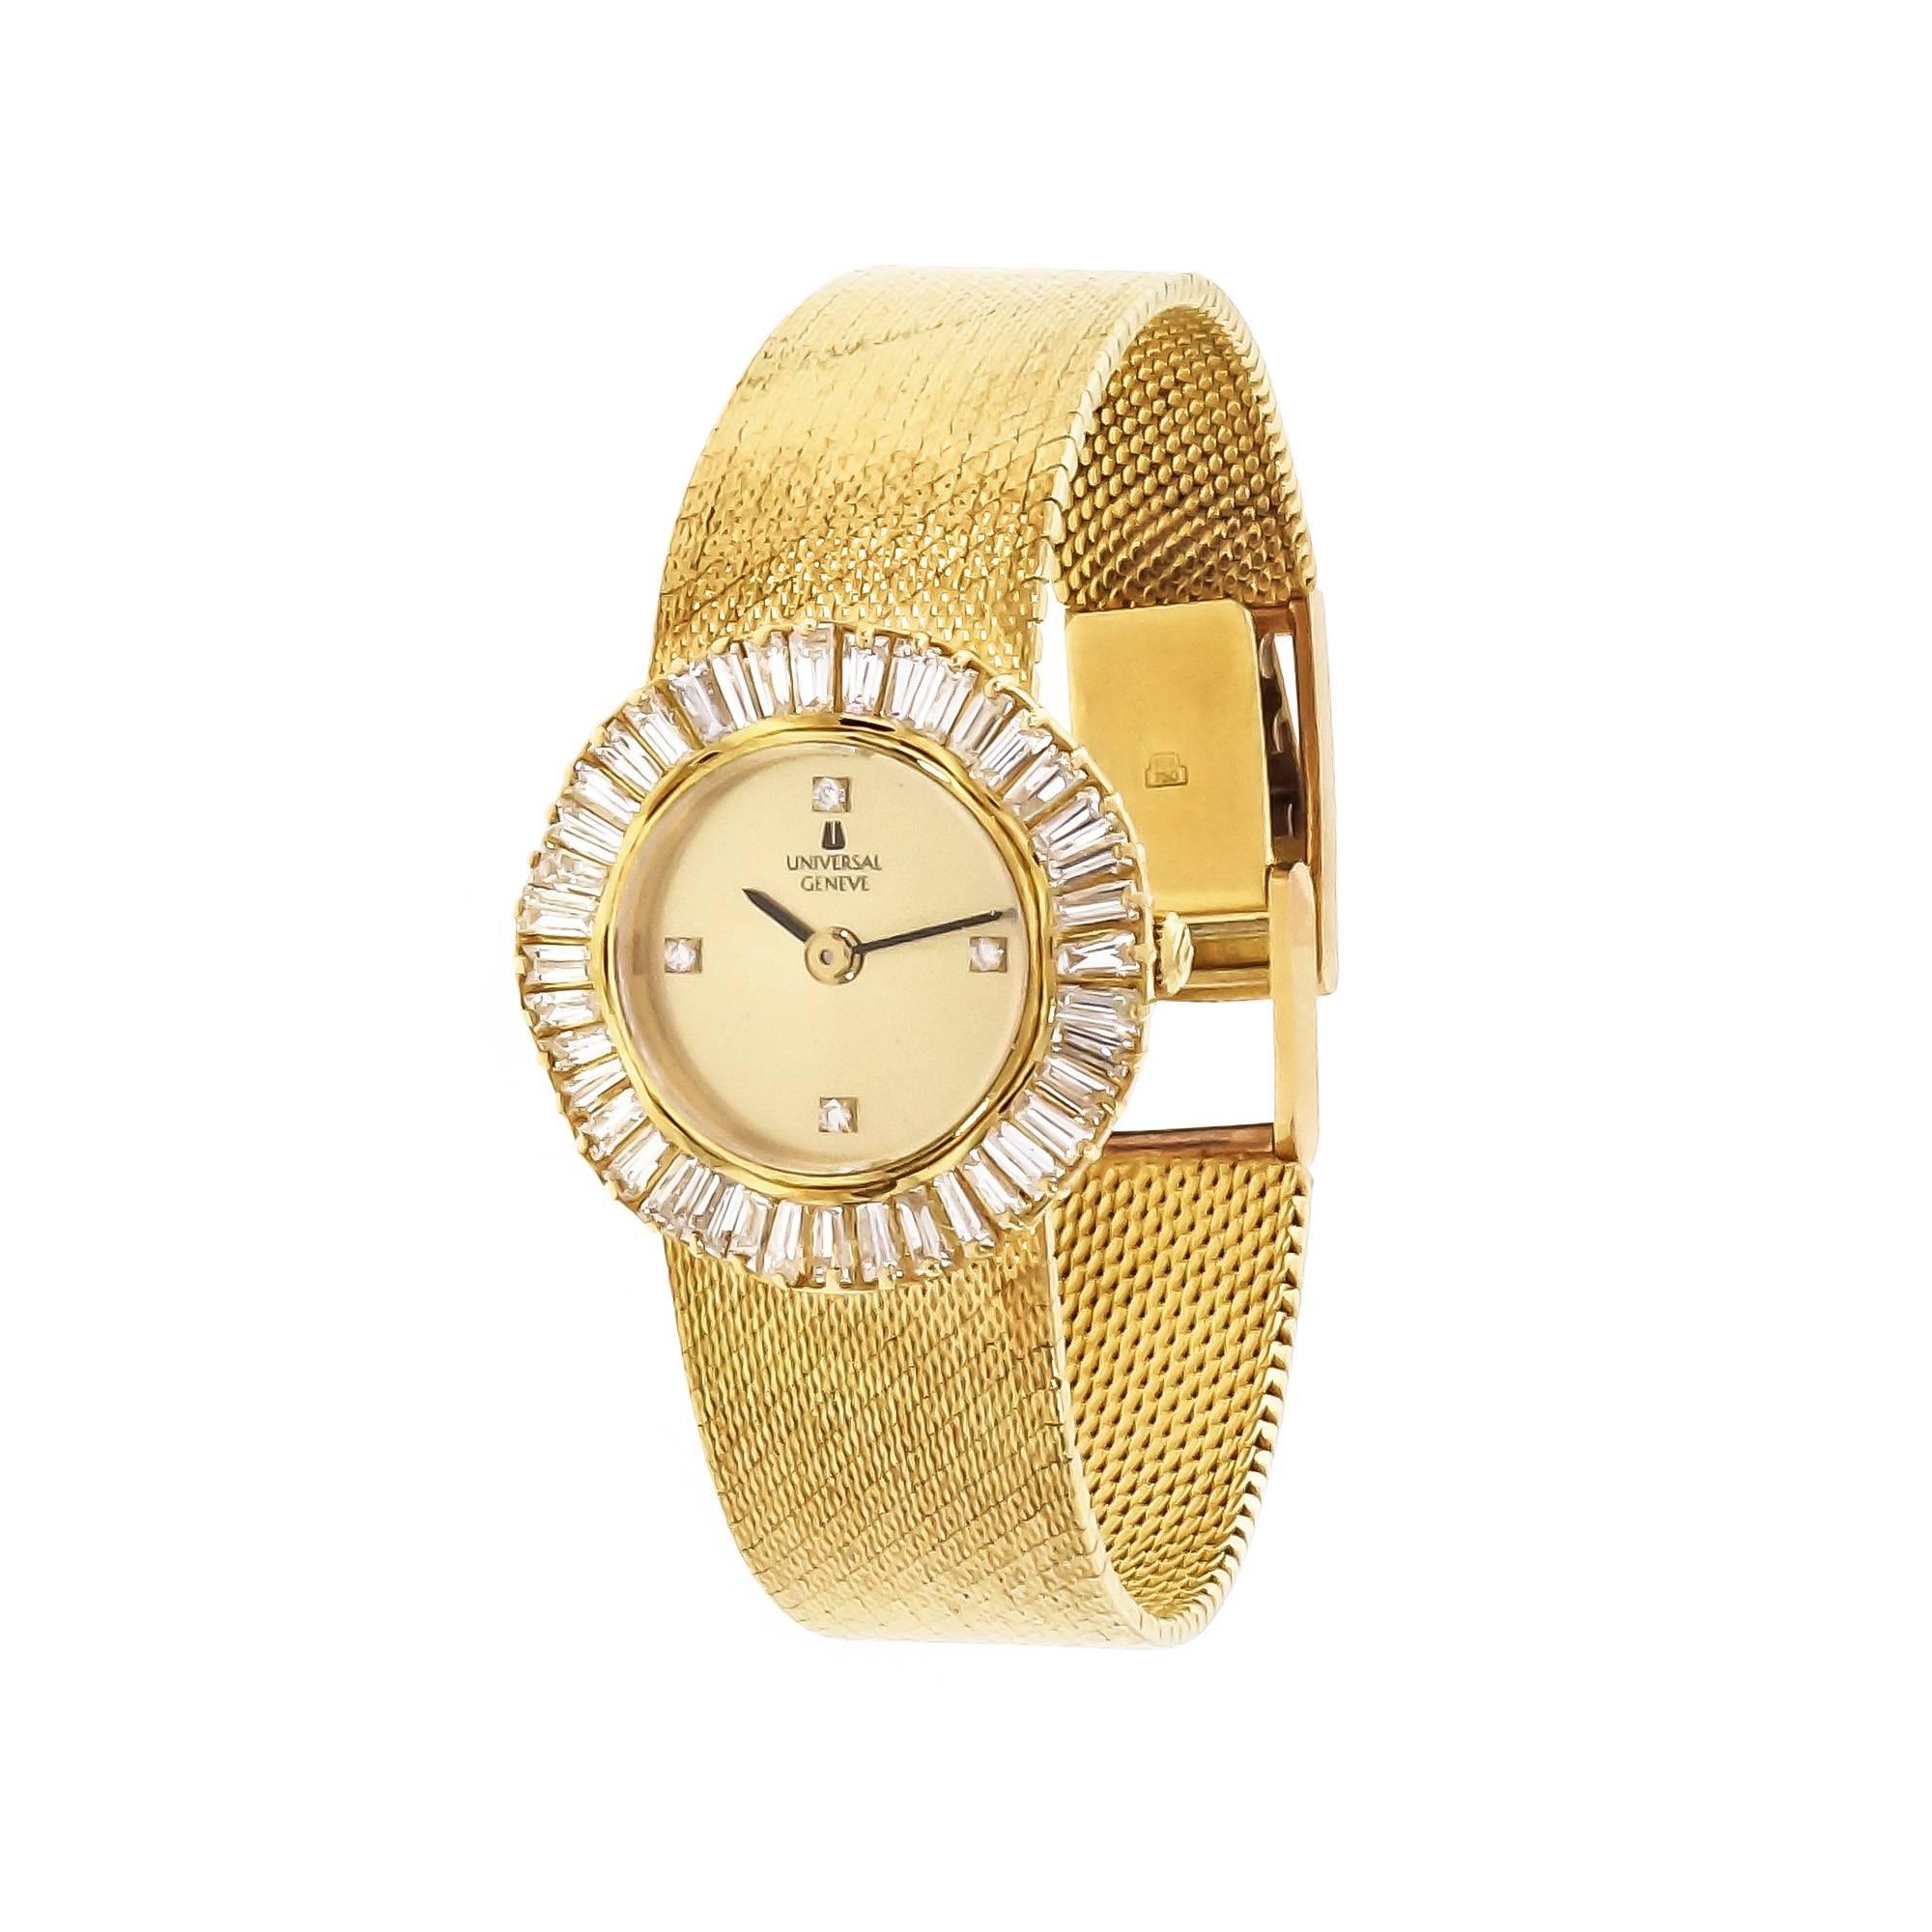 Universal Geneve ladies 18k yellow gold dress watch with baguette Diamond. Diamond bezel and dial. 18k mesh gold. Universal Geneve Quartz movement. Steel case back screws.

18k yellow gold
40 tapered Baguette Diamonds, approx. total weight 2.00cts,